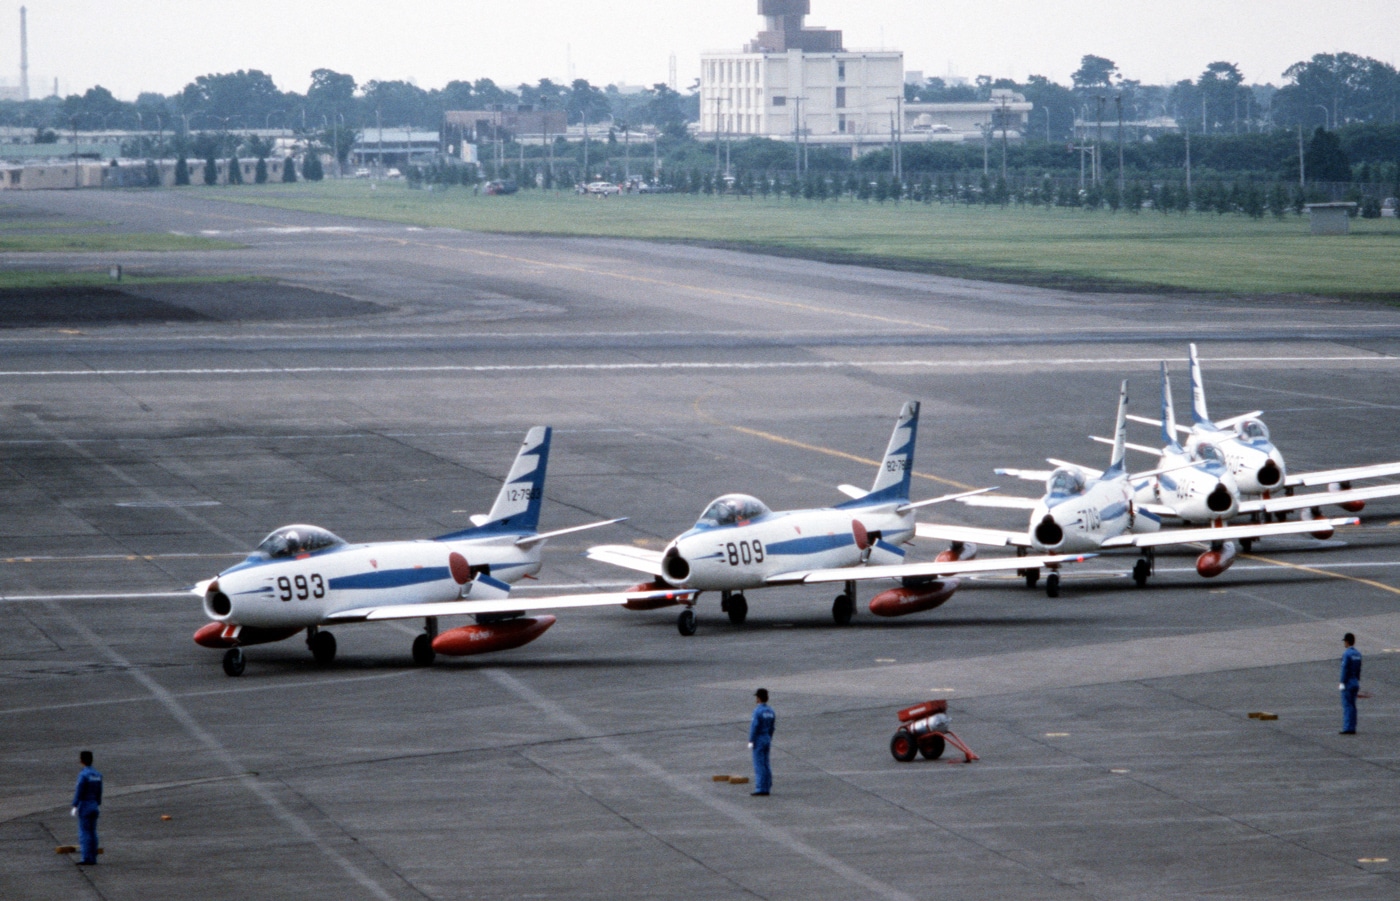 In this photo we see five F-86 jets taxi on a runway in Japan. These jets are part of Blue Impulse — the flight demo team for the Japanese Air Self Defense Force. This demo team is similar to the Blue Angles and Thunderbirds in the United States. Japan was one of several countries that purchased F-86 fighters from the USA.